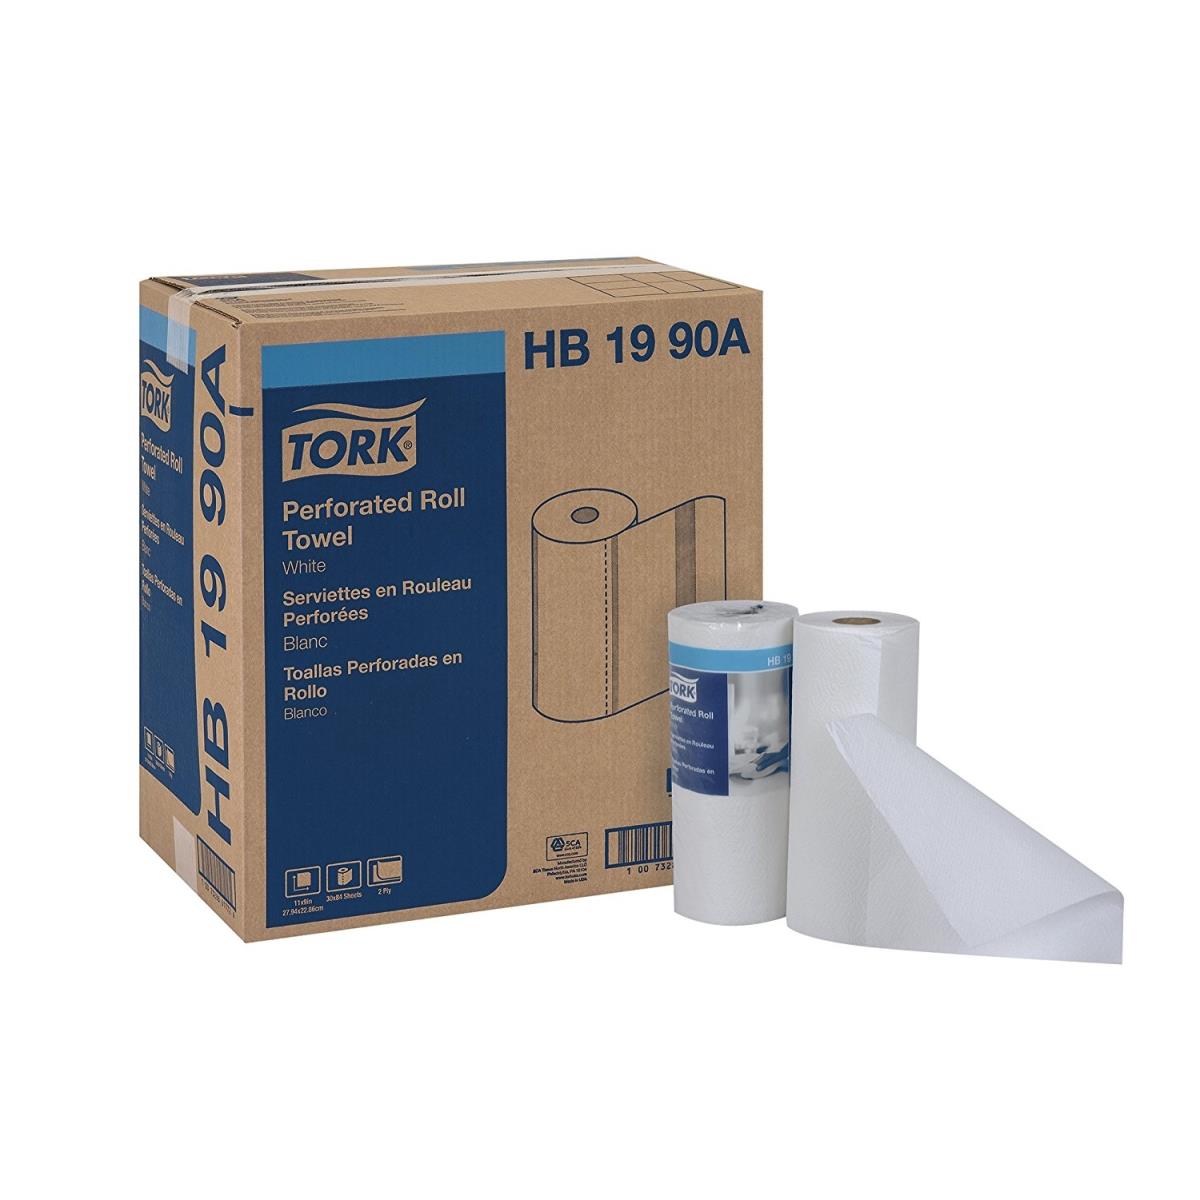 Hb1990a Pe 84 Count White 2ply Tork Perforated Roll Towel - Case Of 30